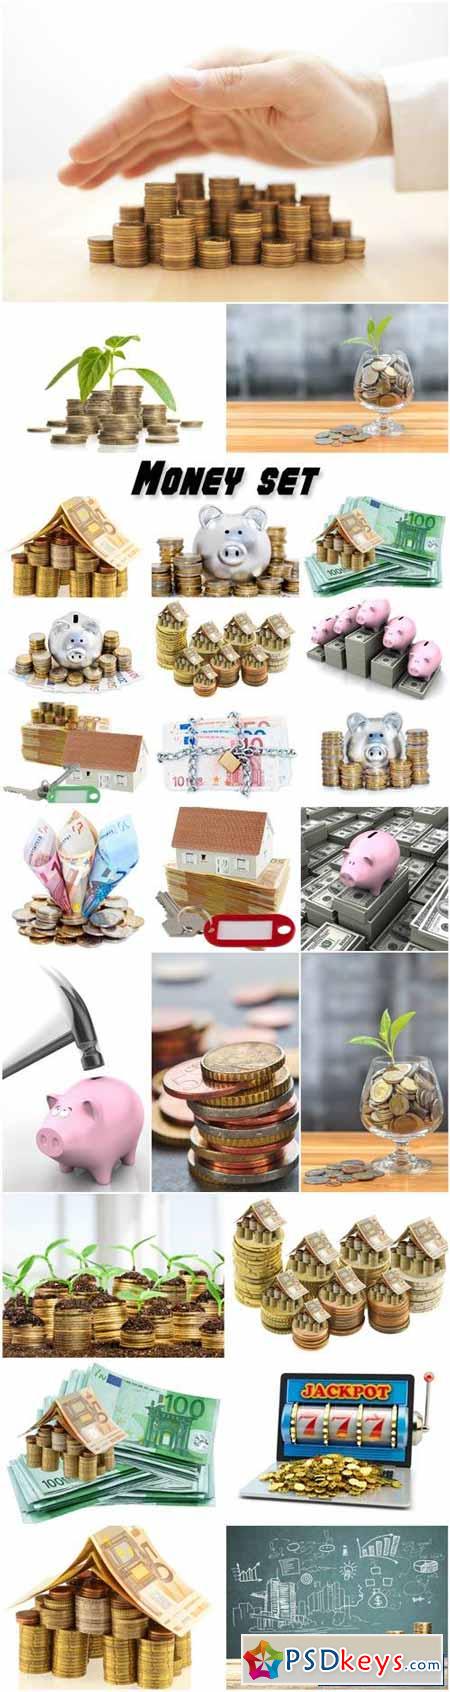 Money, coins and different denominations